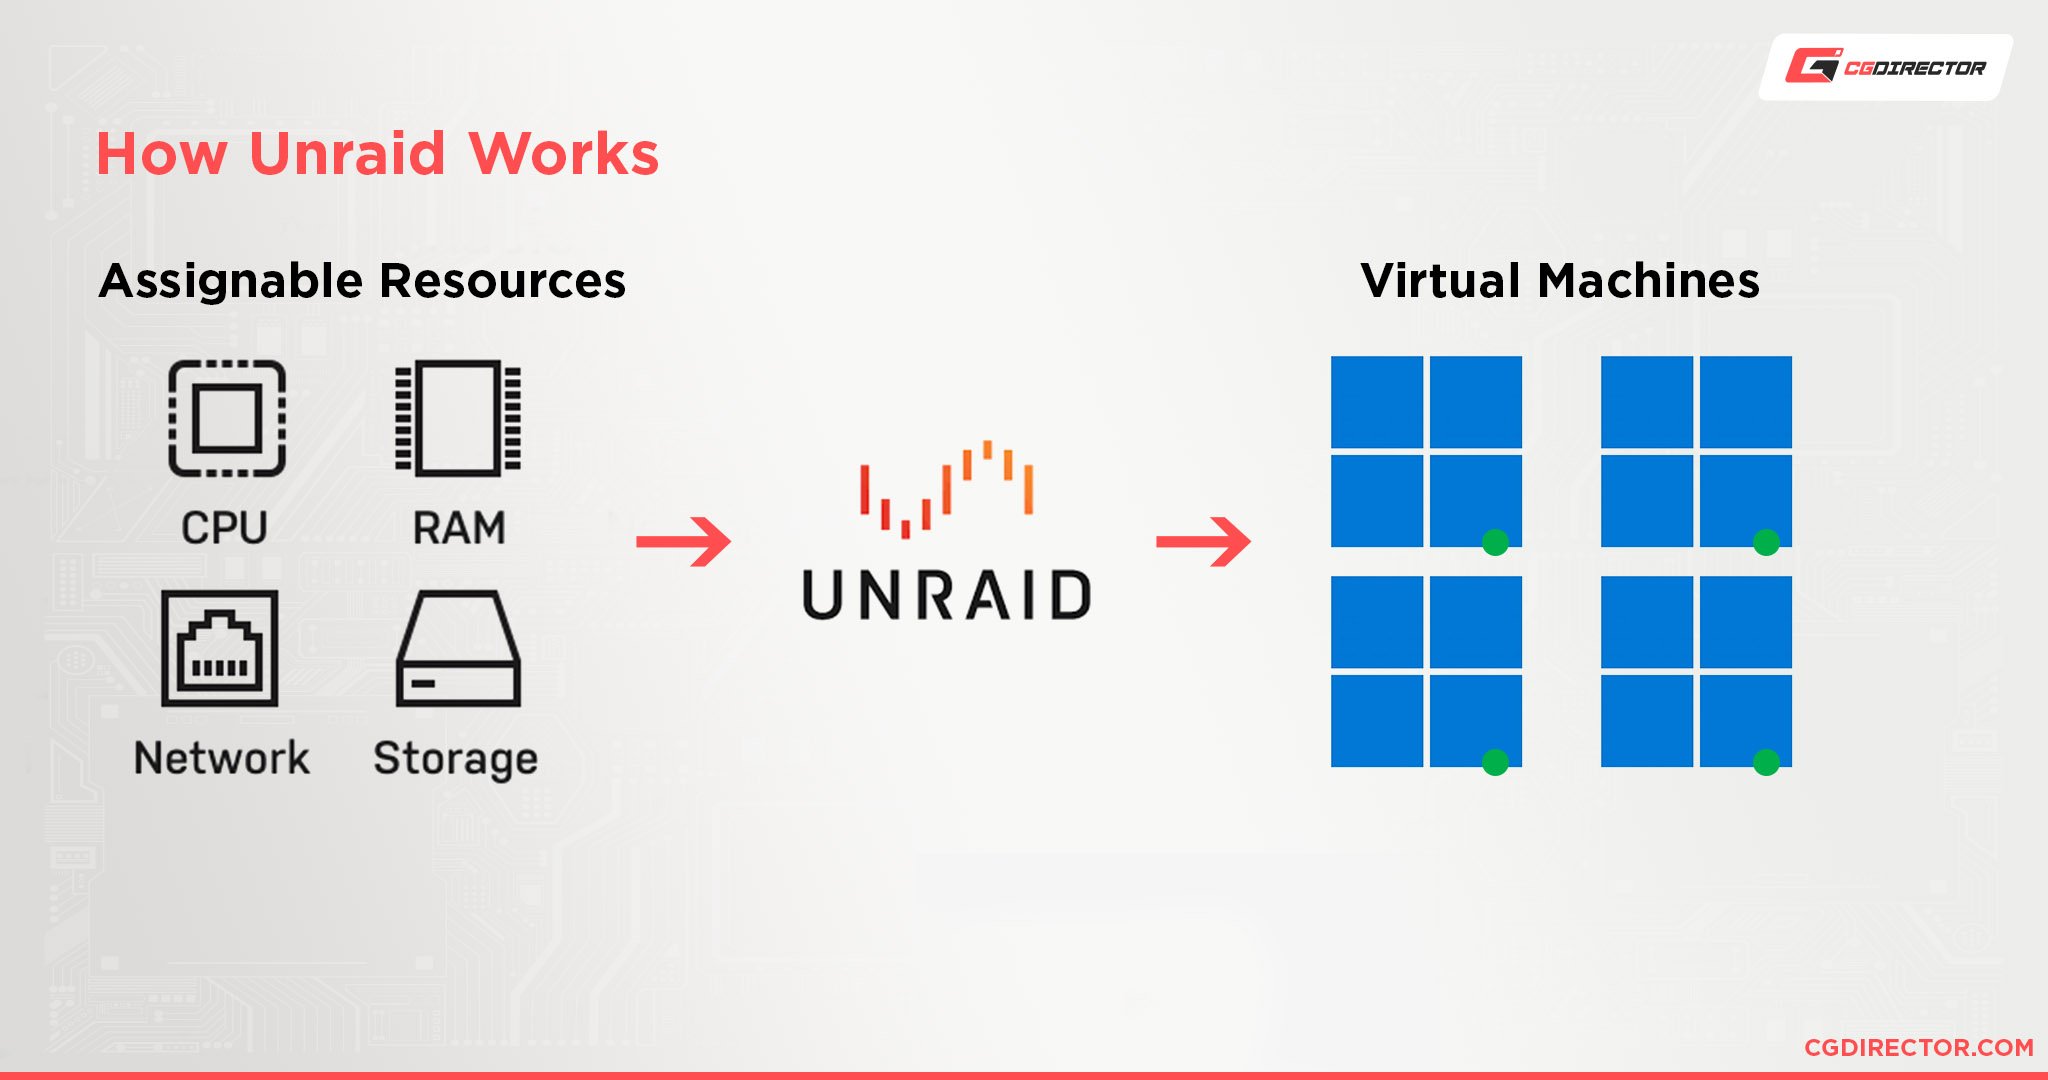 How Unraid Works